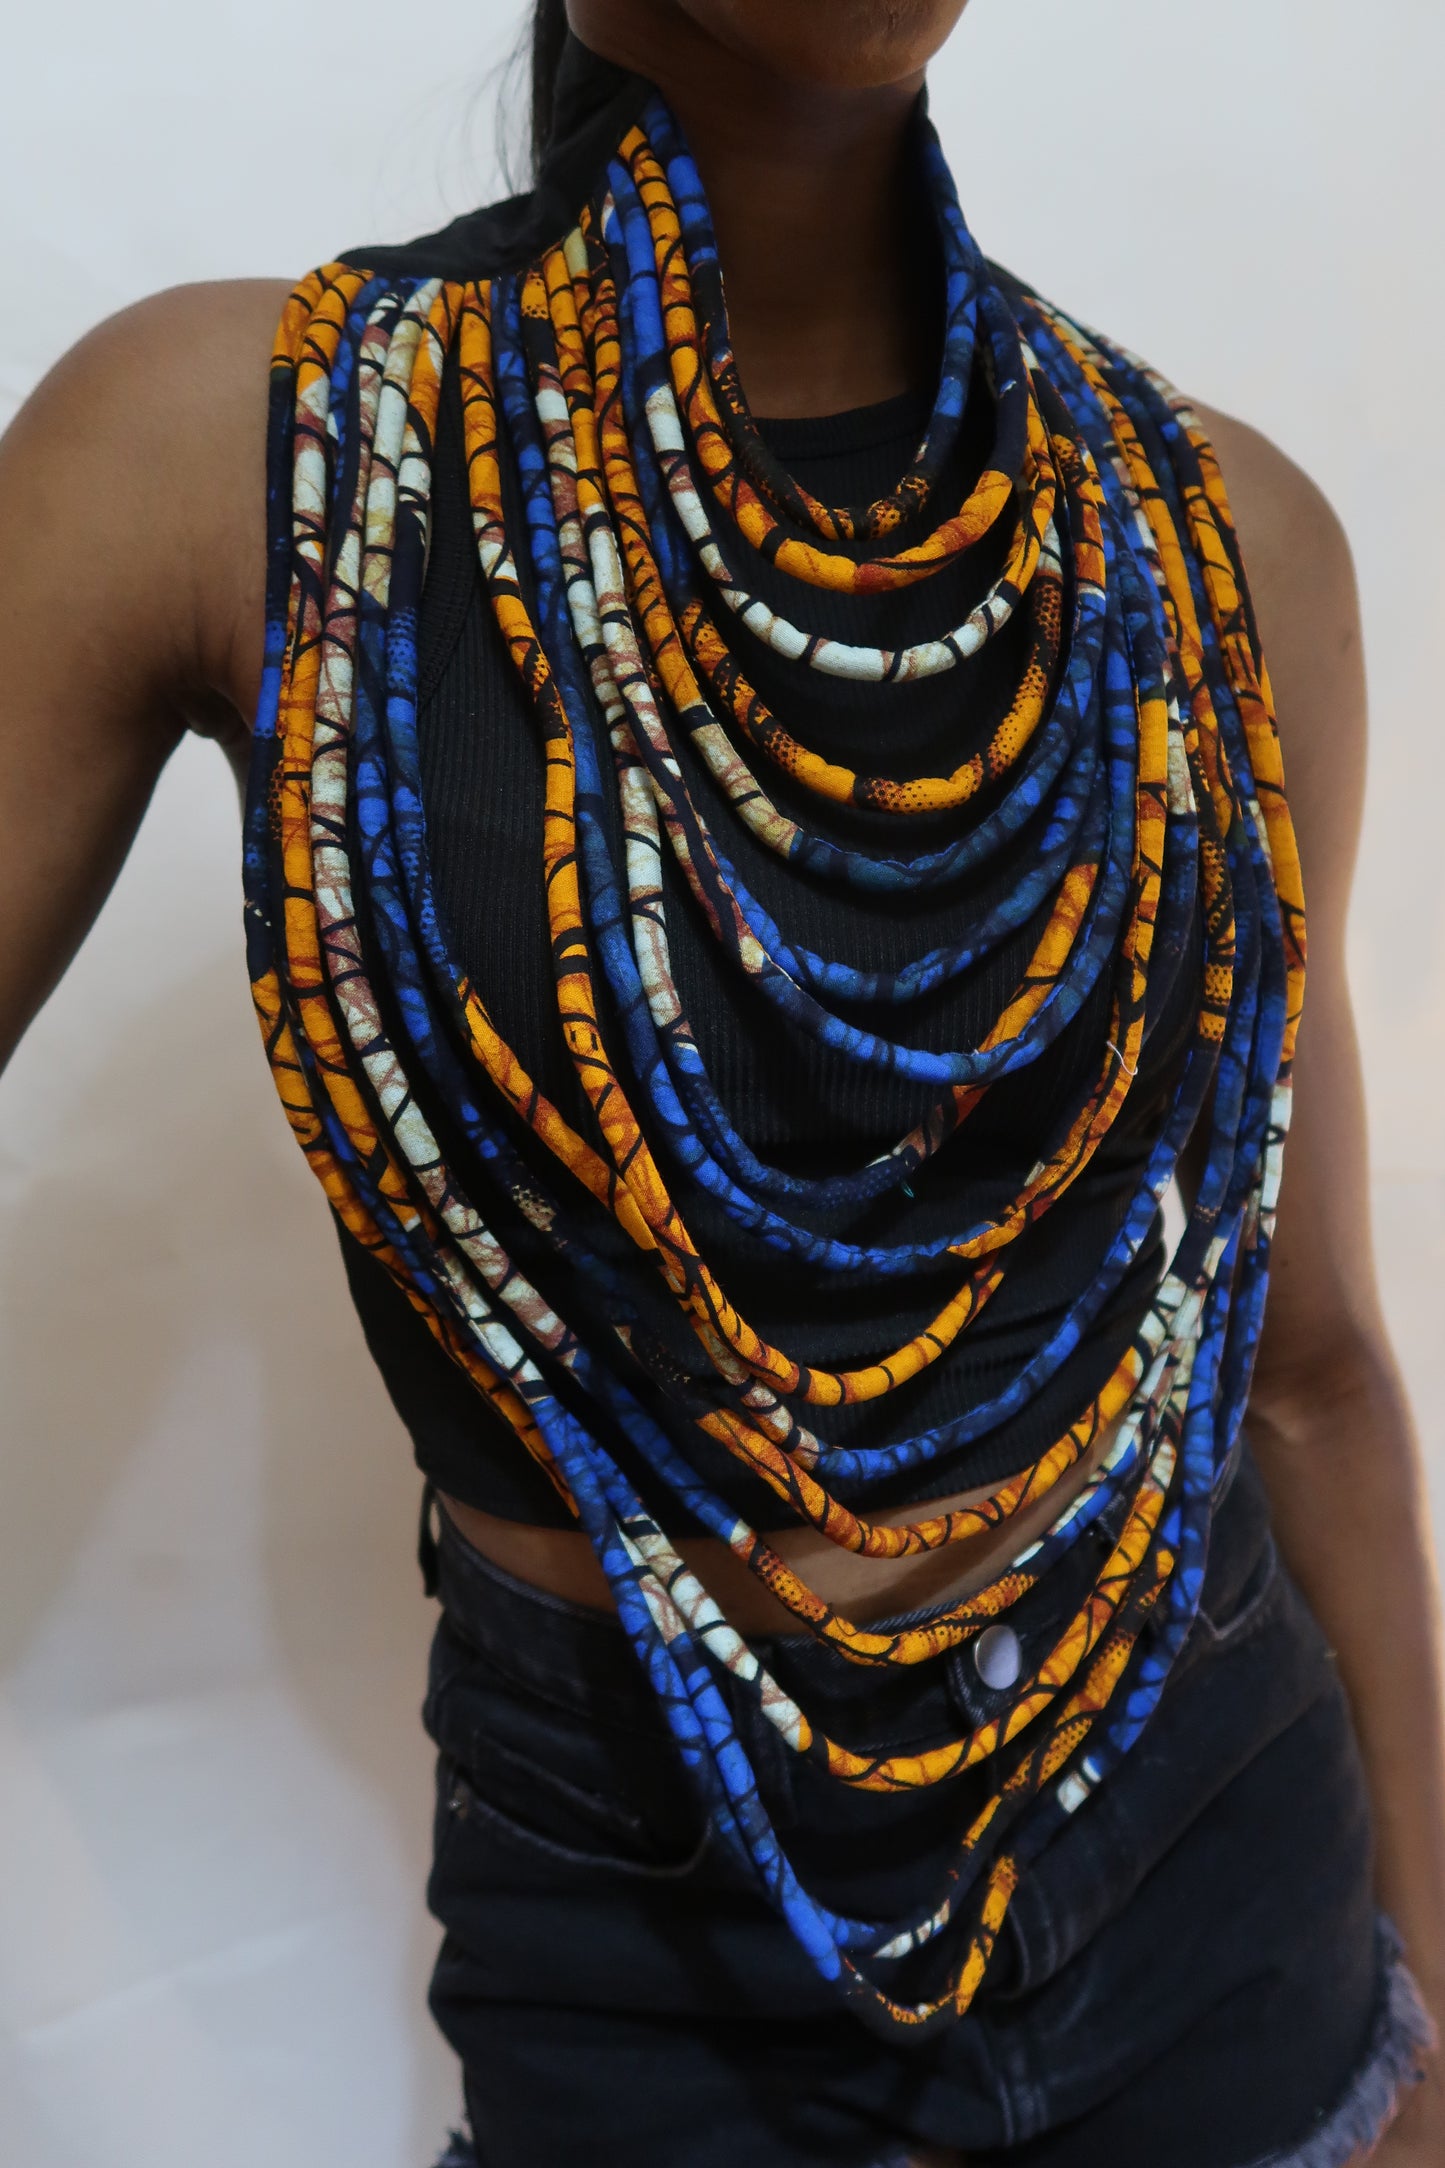 Layered african fabric statement necklace - Ankara necklace - Blue, yellow and orange